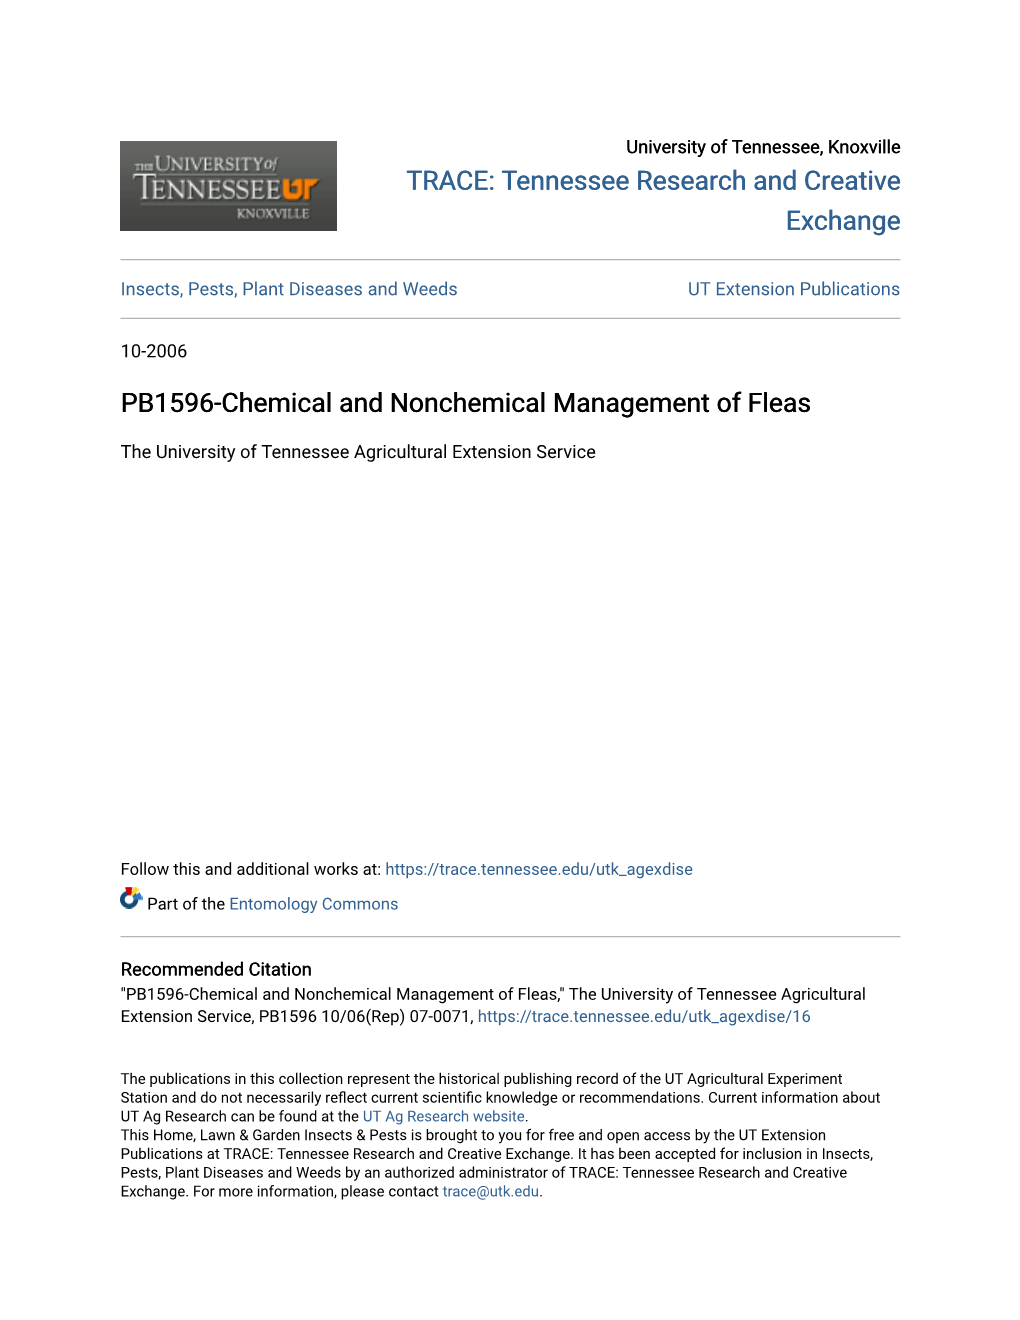 PB1596-Chemical and Nonchemical Management of Fleas